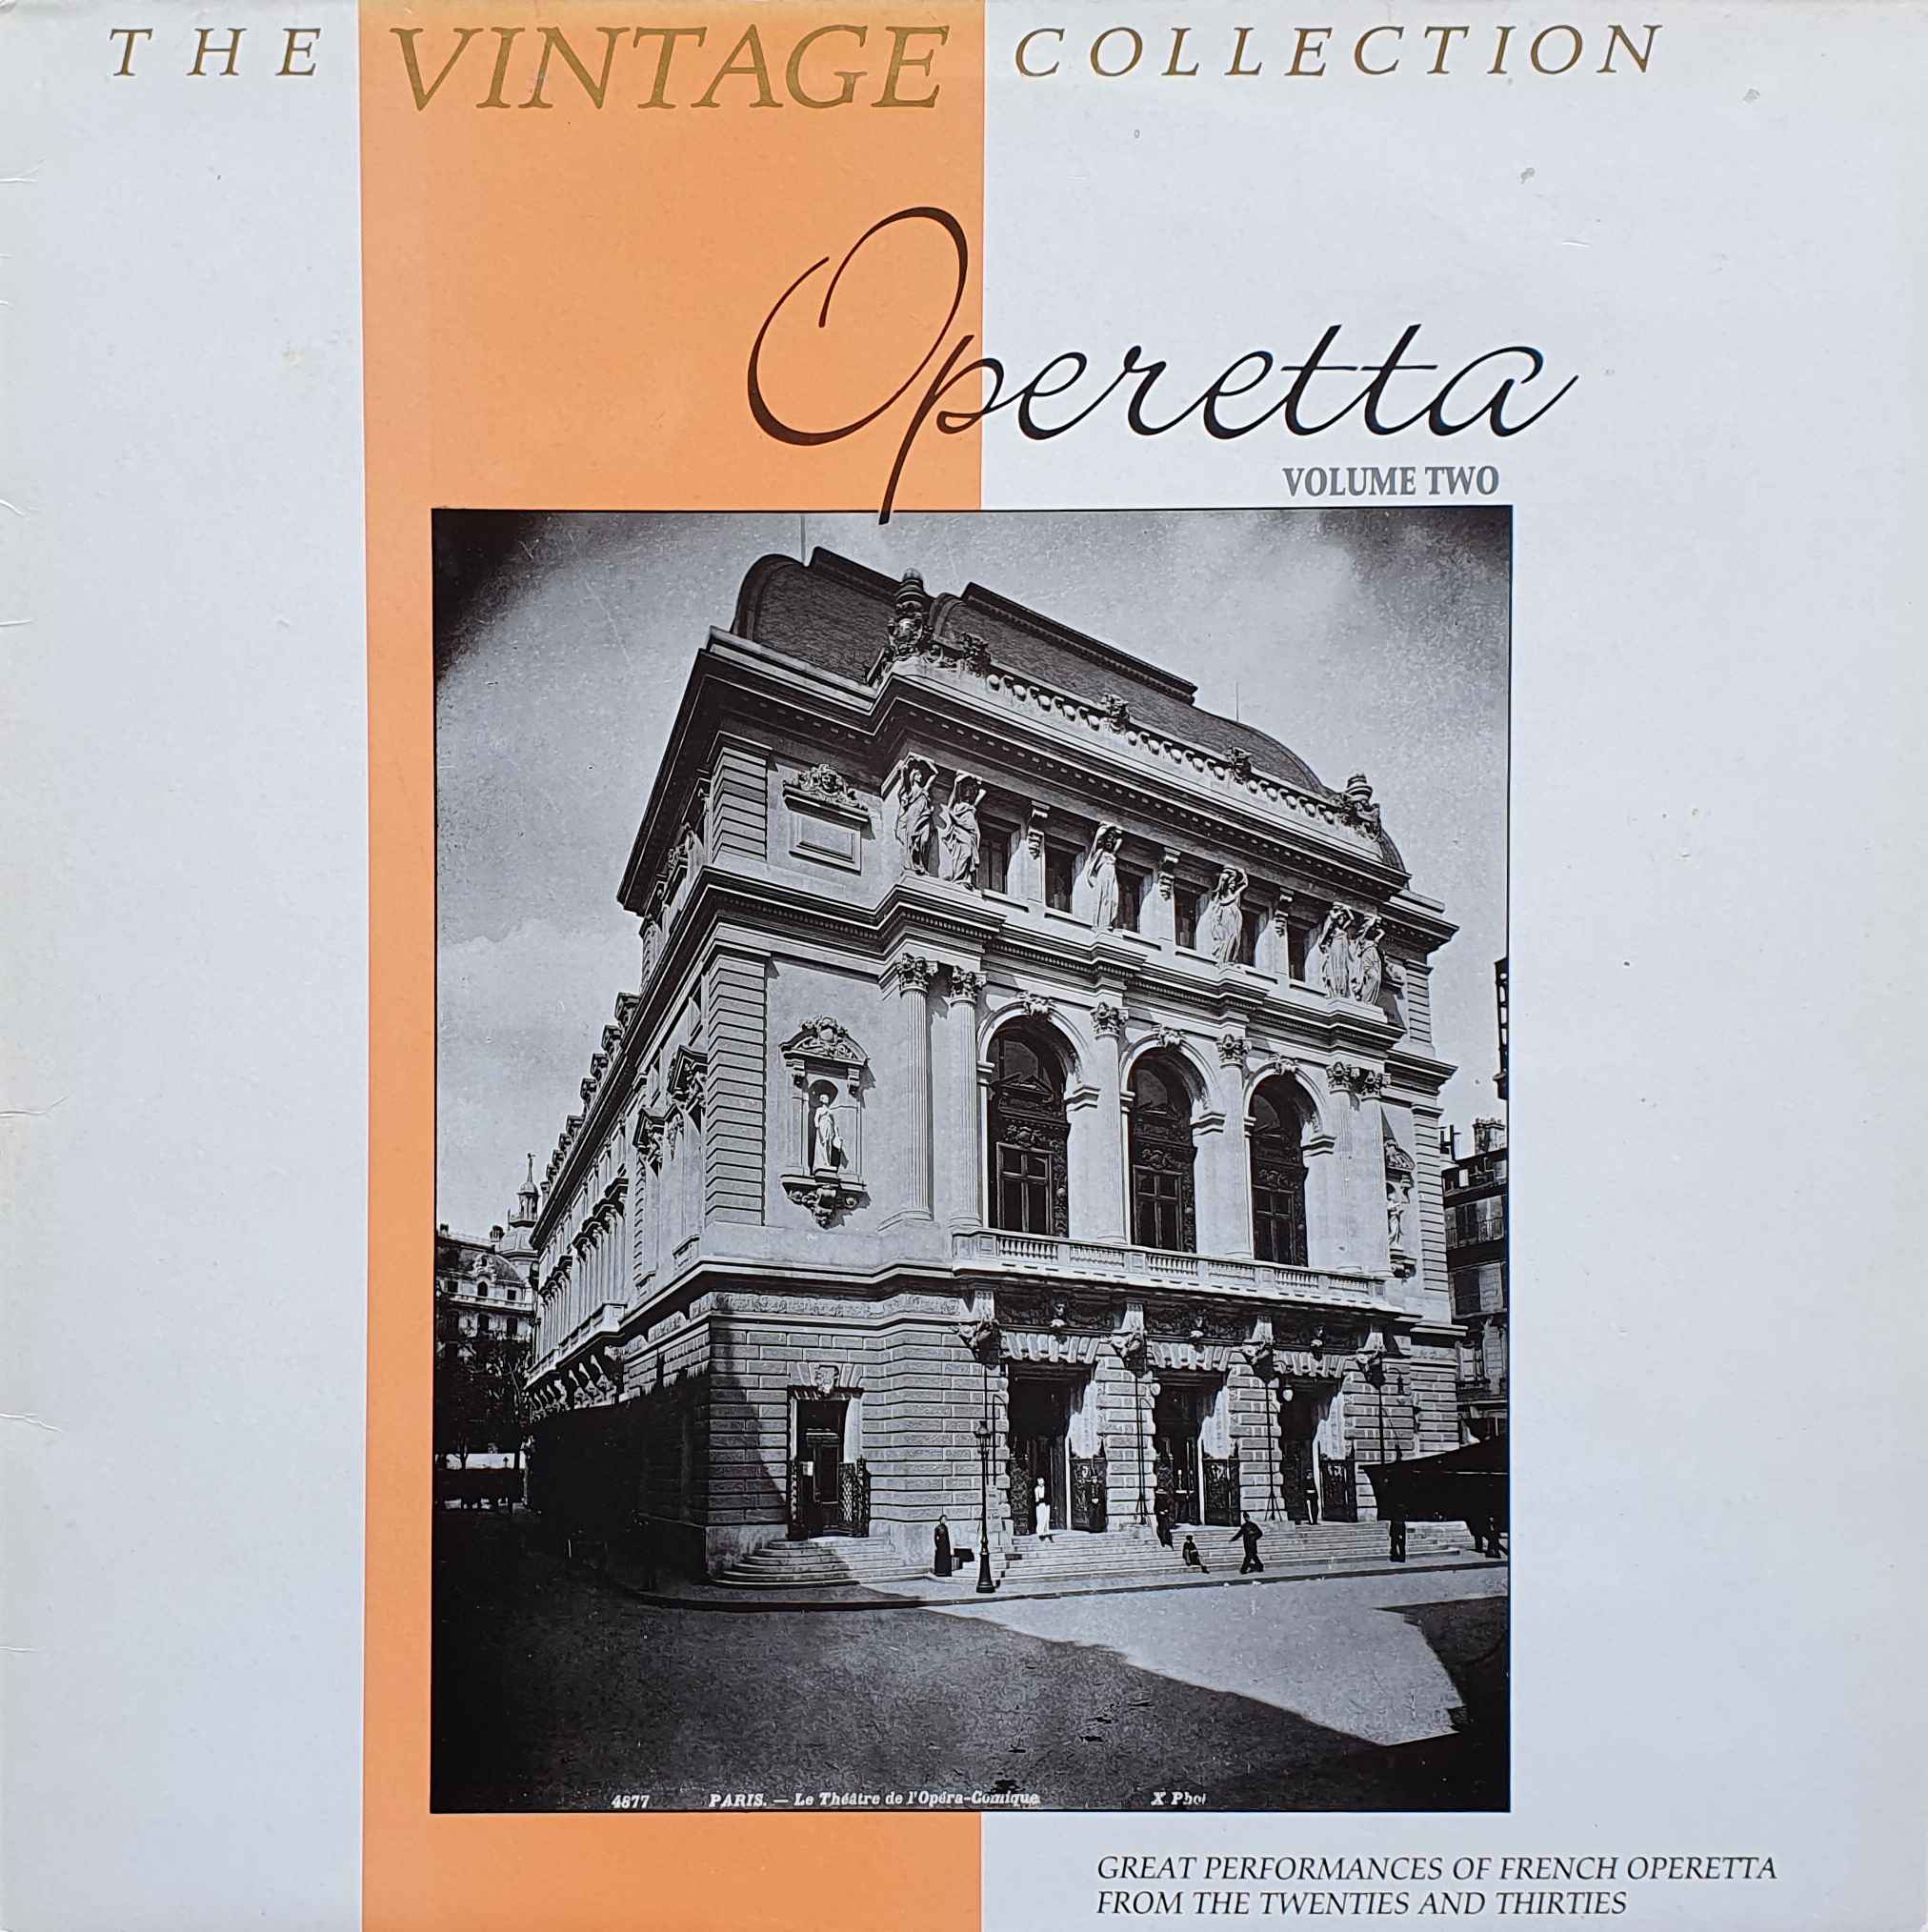 Picture of REH 755 The vintage collection - Operetta volume 2 by artist Various from the BBC albums - Records and Tapes library